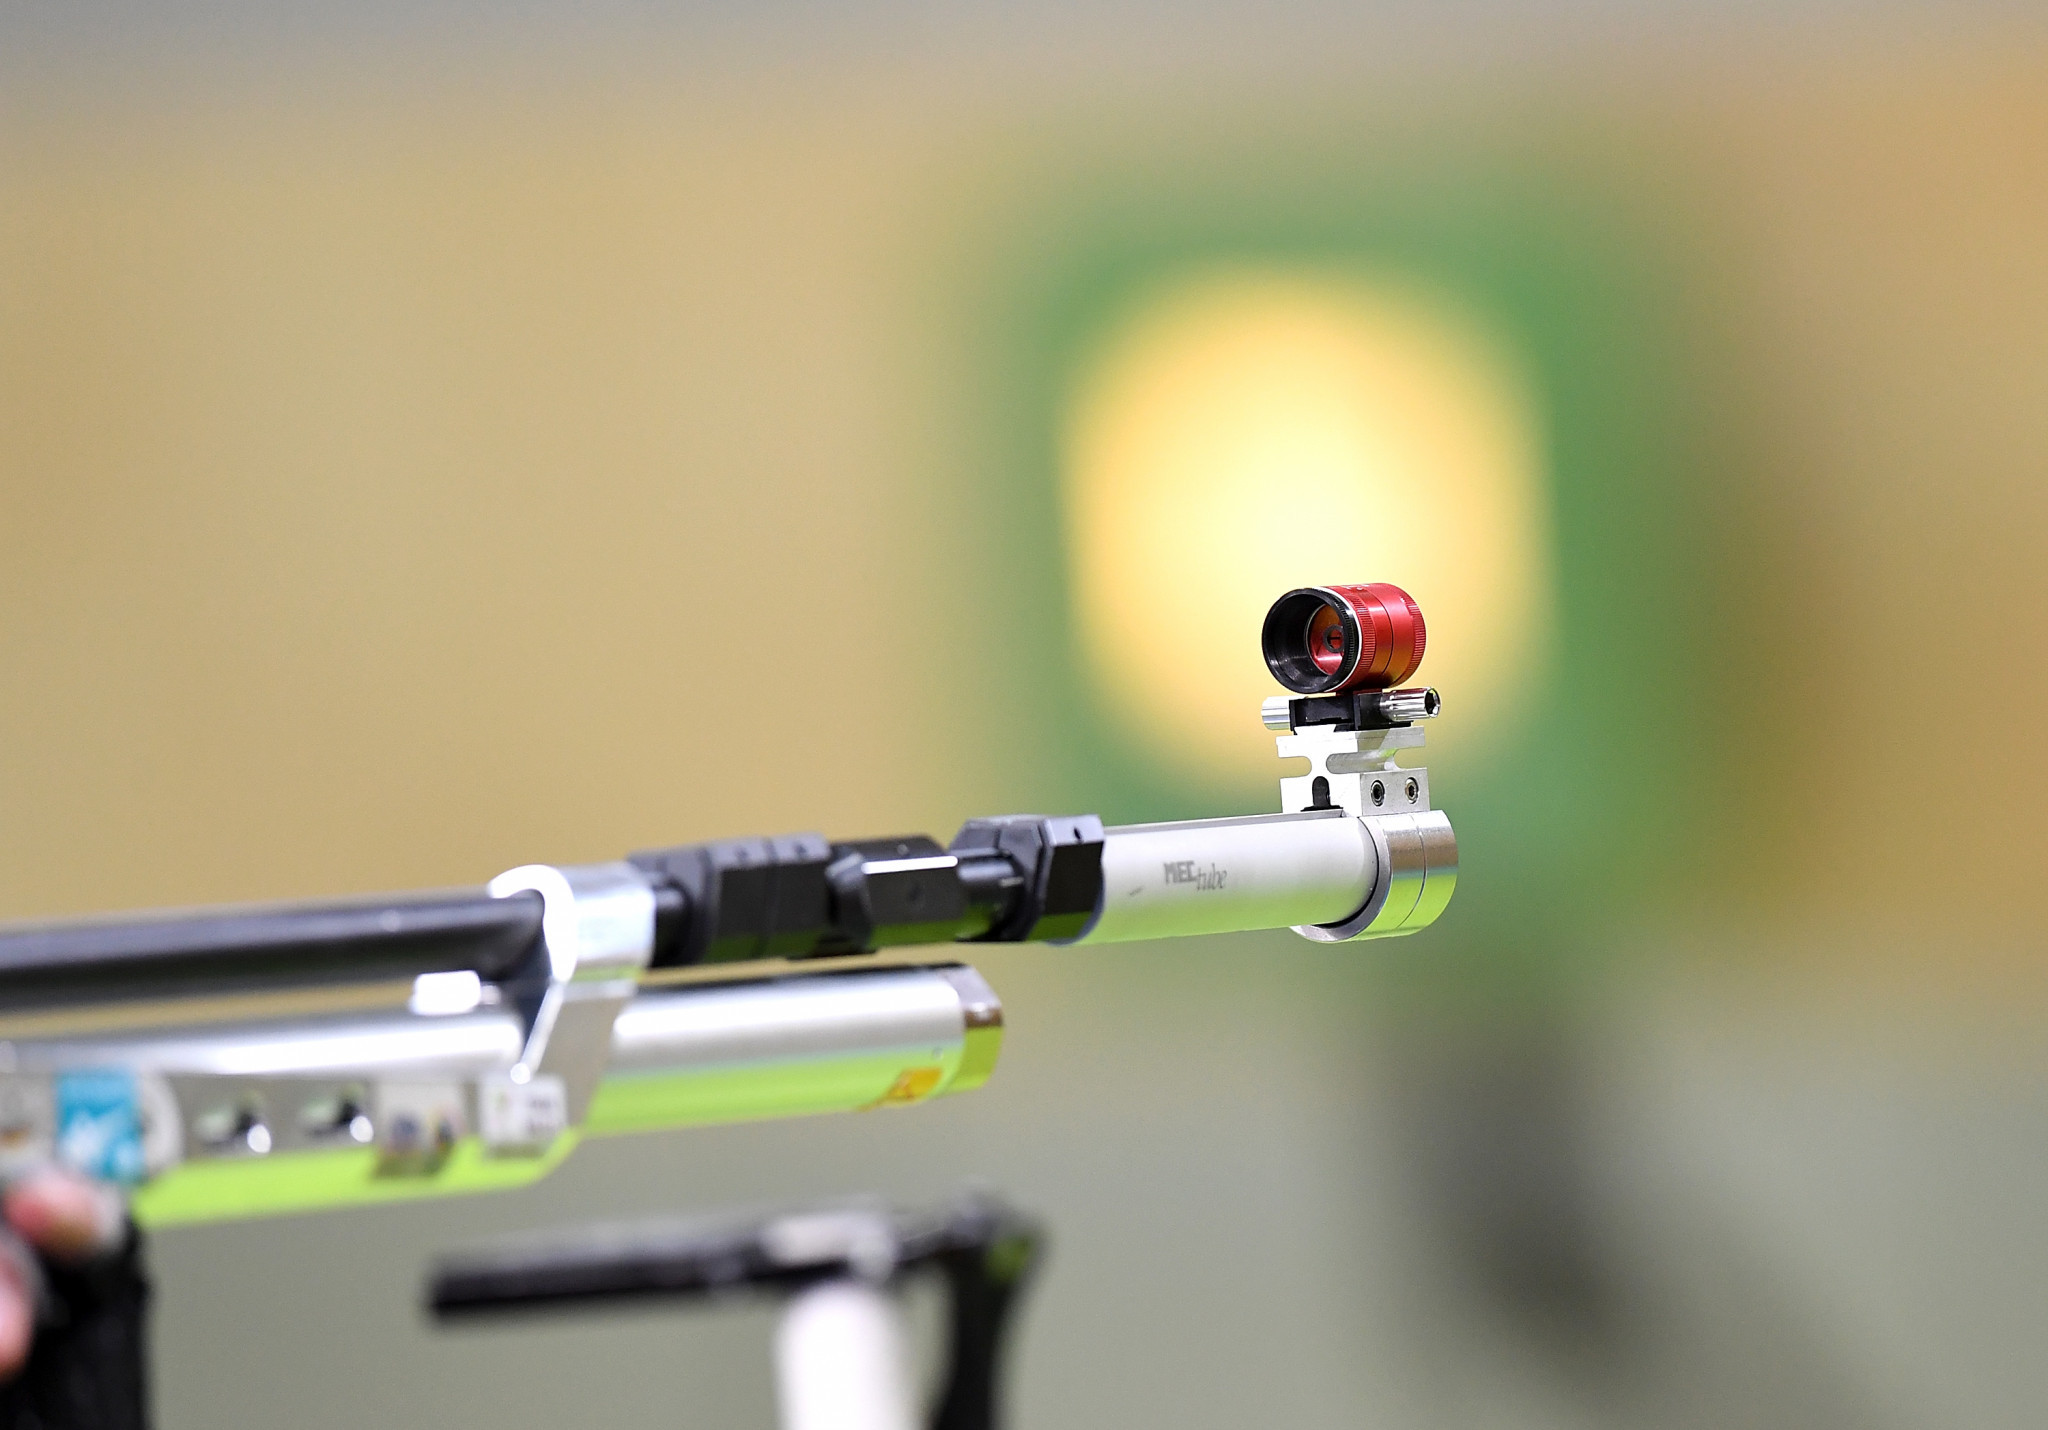 The Czech trio of Filip Nepejchal, Petr Nymbursky and Jiří Přívratský sealed the men’s 50 metres rifle three positions team title at the ISSF World Cup ©Getty Images